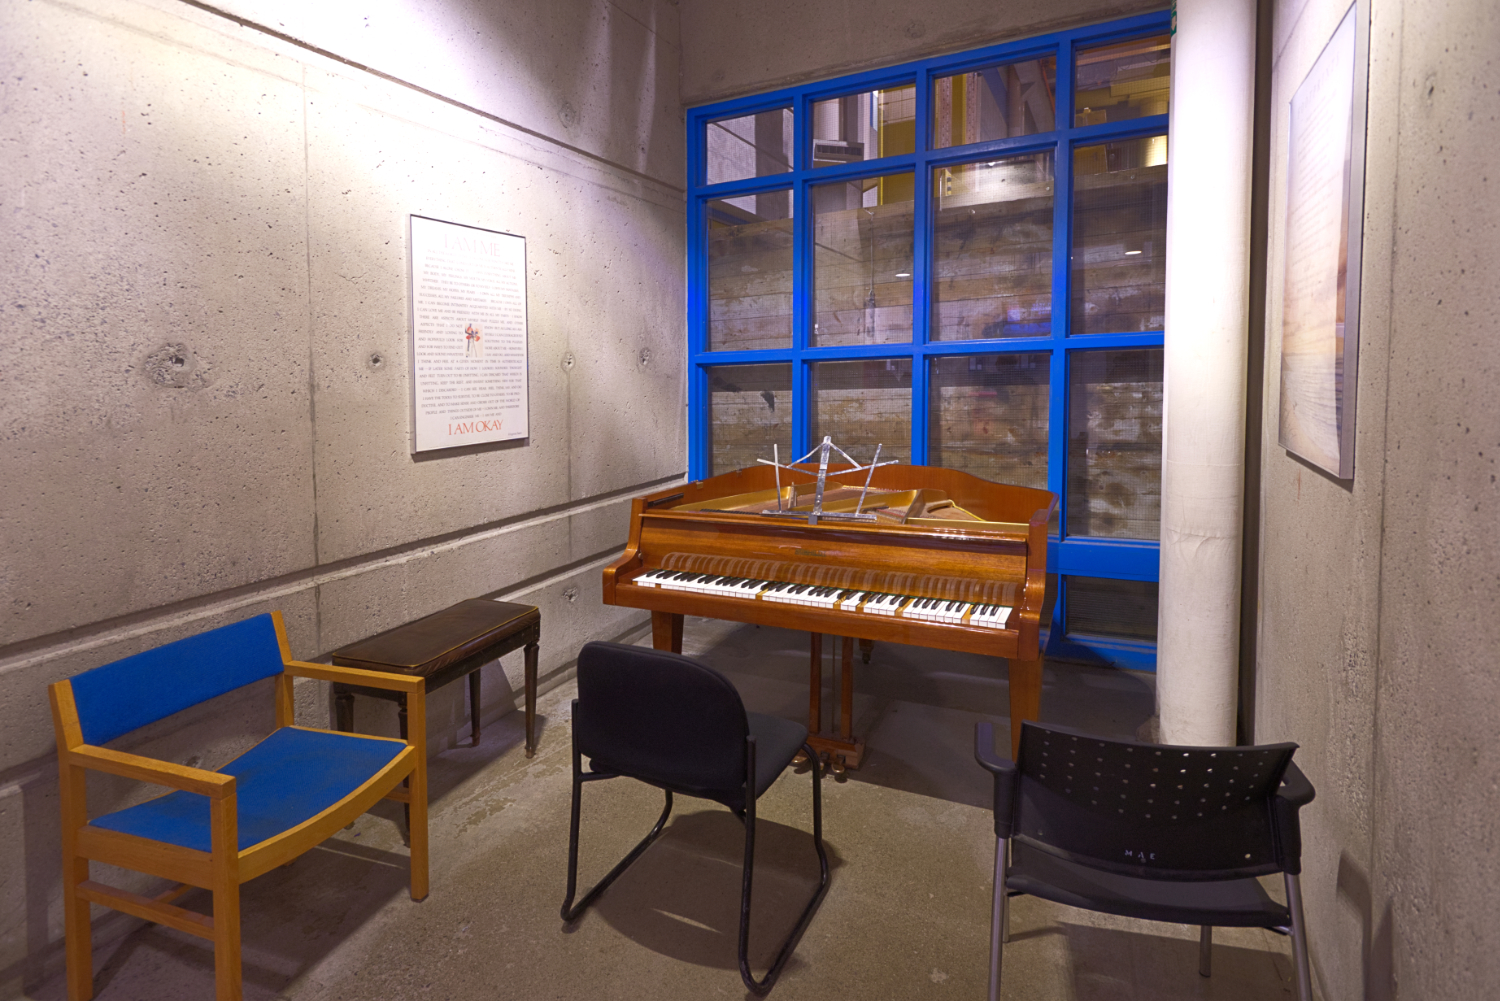 A Piano sits in an alcove in Carleton's Minto Building.